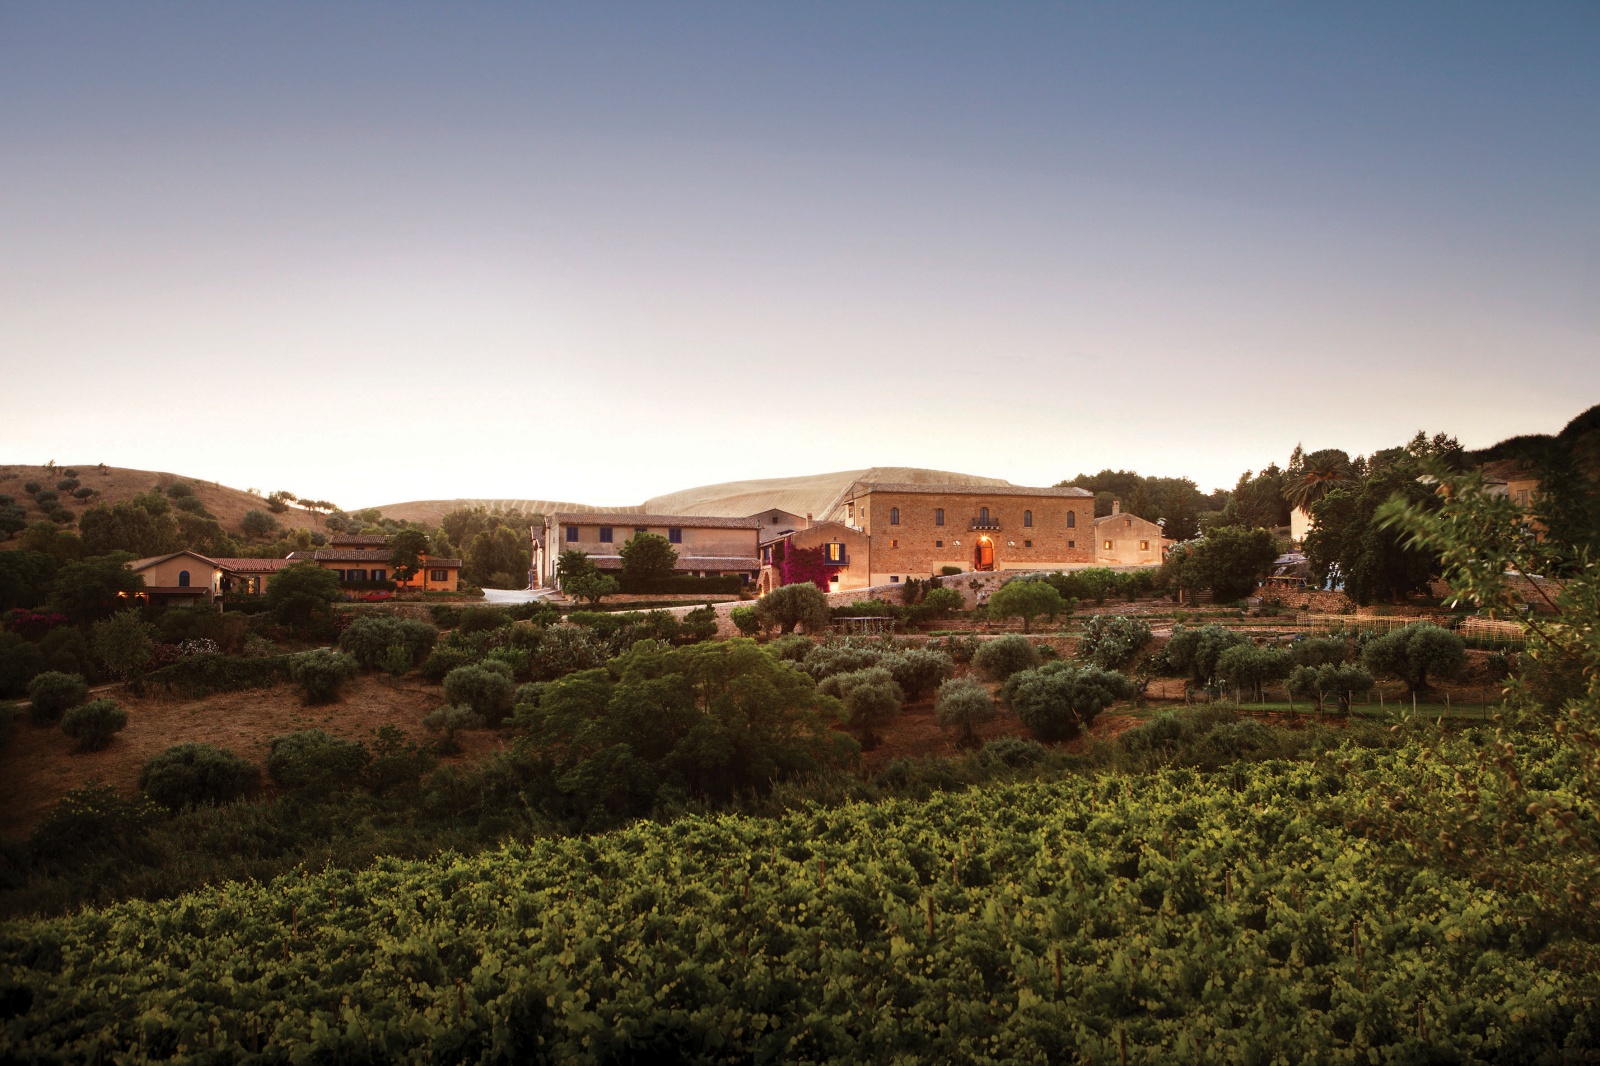 A Sustainable Winery In The Heart of Sicily